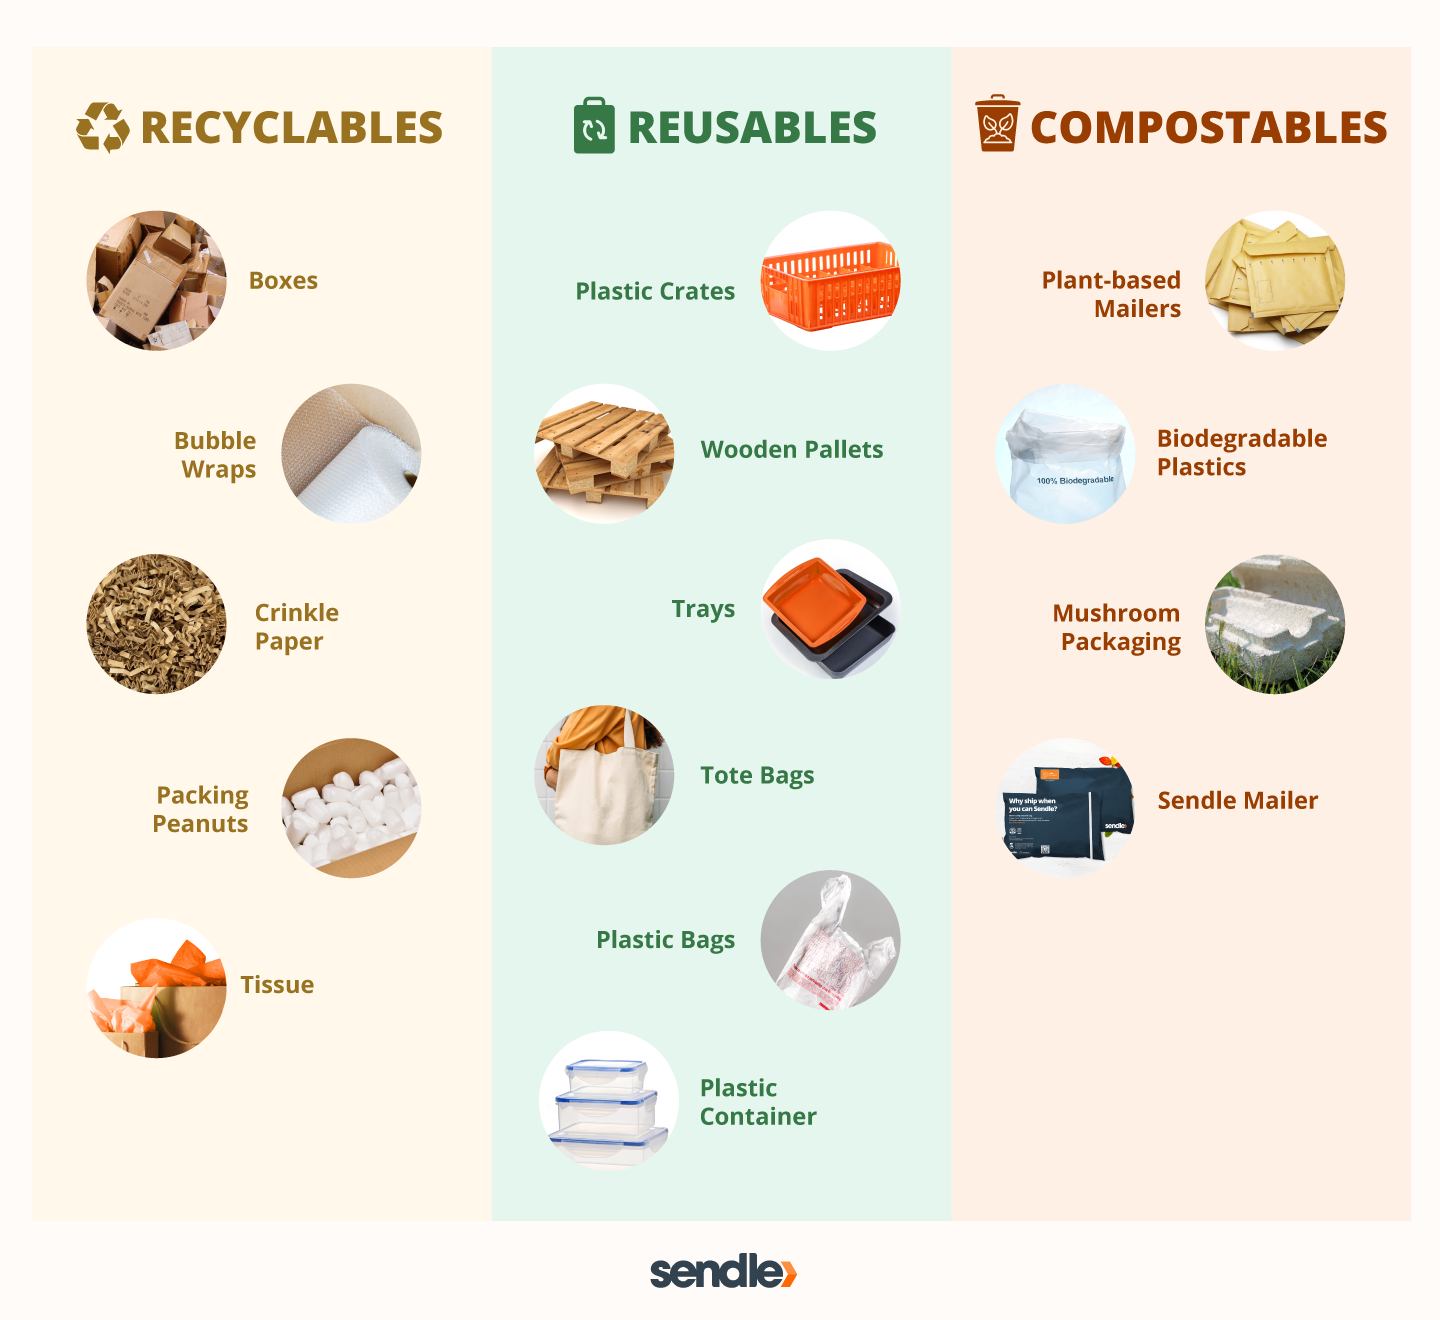 Are the packaging materials also sustainable?